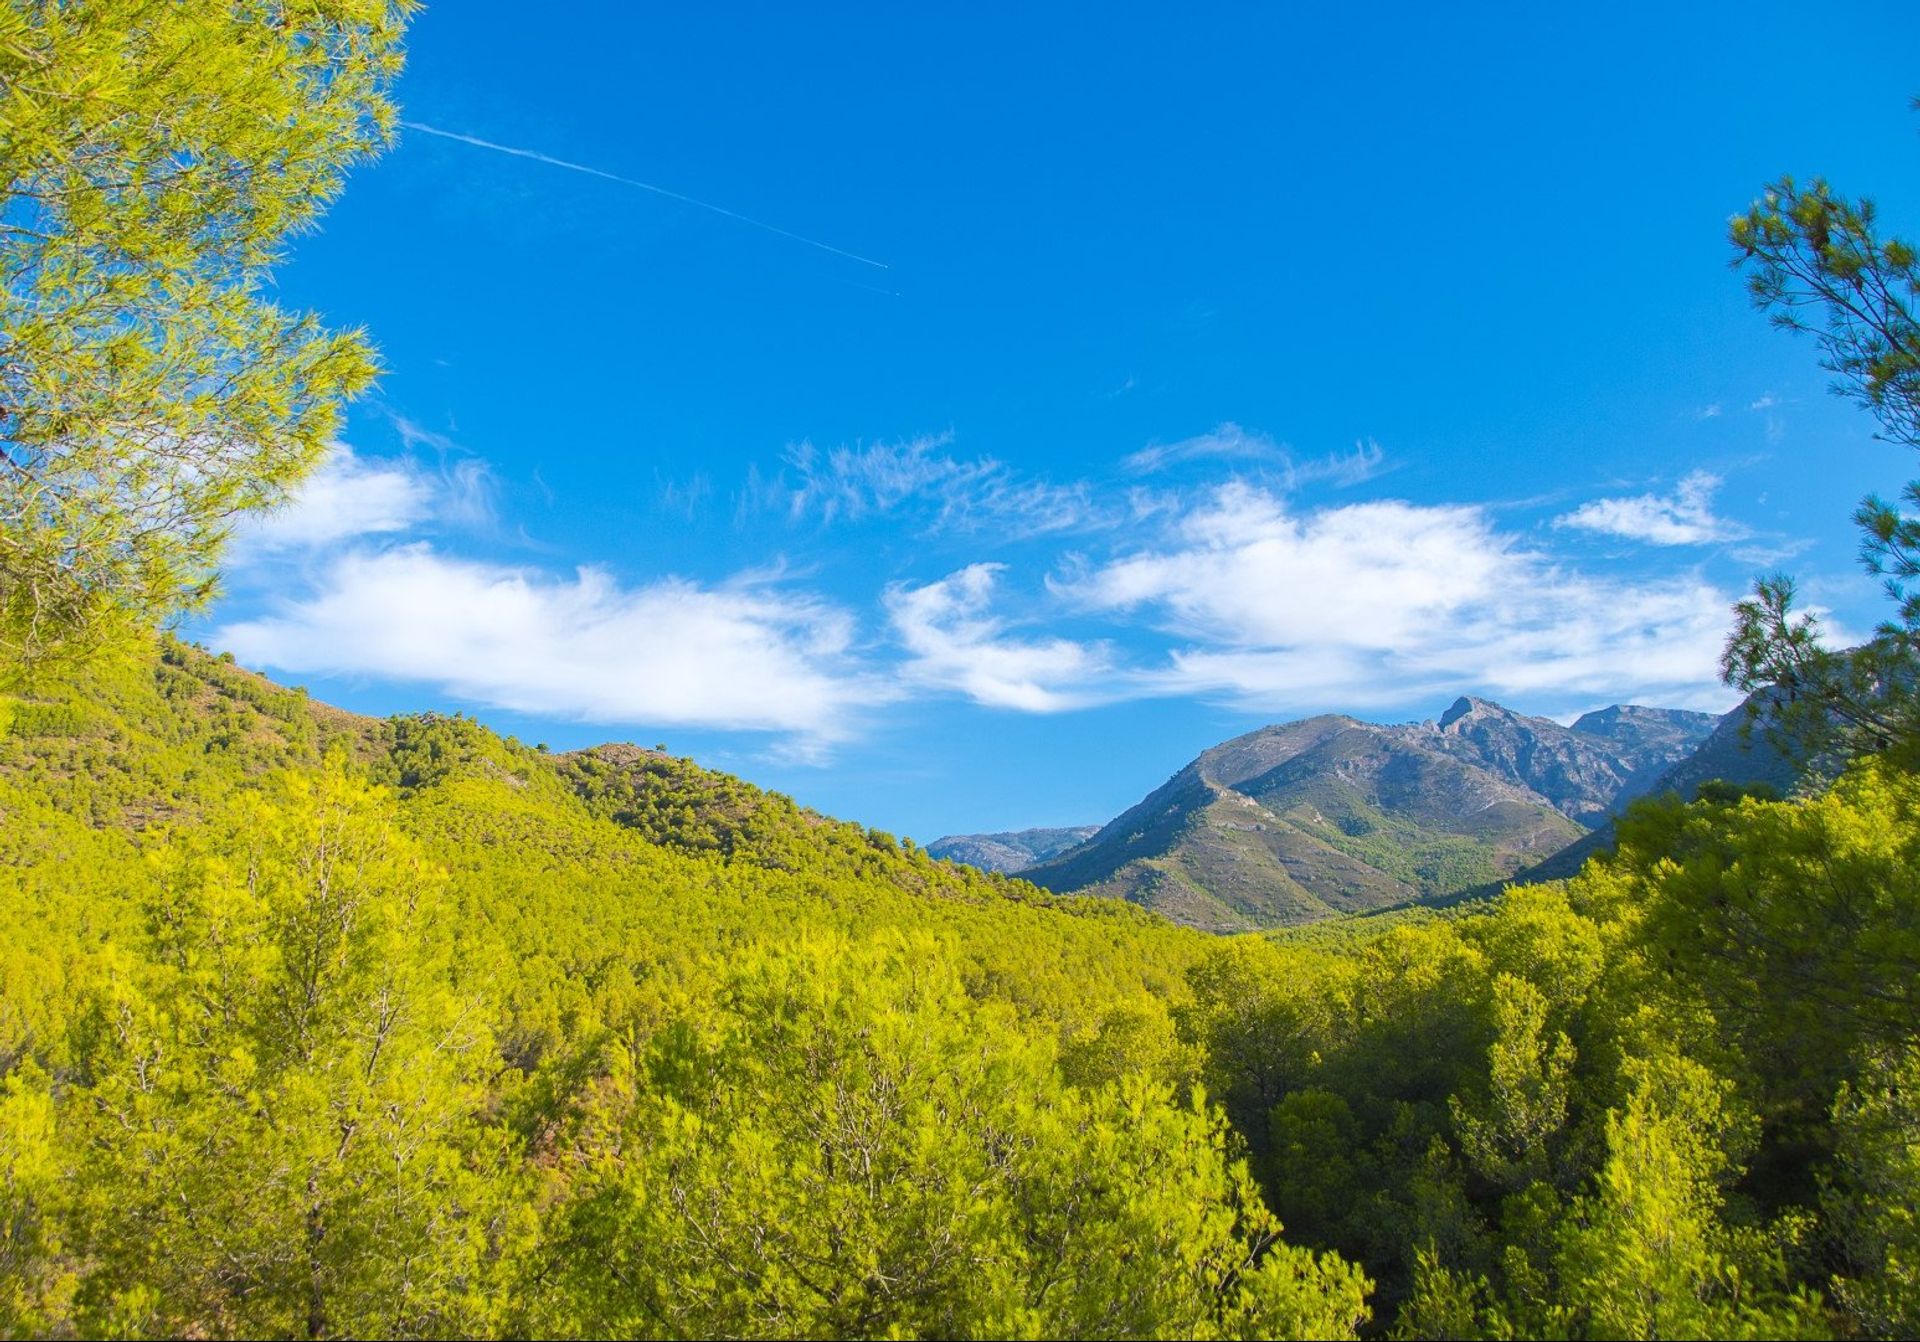 The lush greenery of Sierra de Tejeda national park stretches along the western region of the Costa Tropical